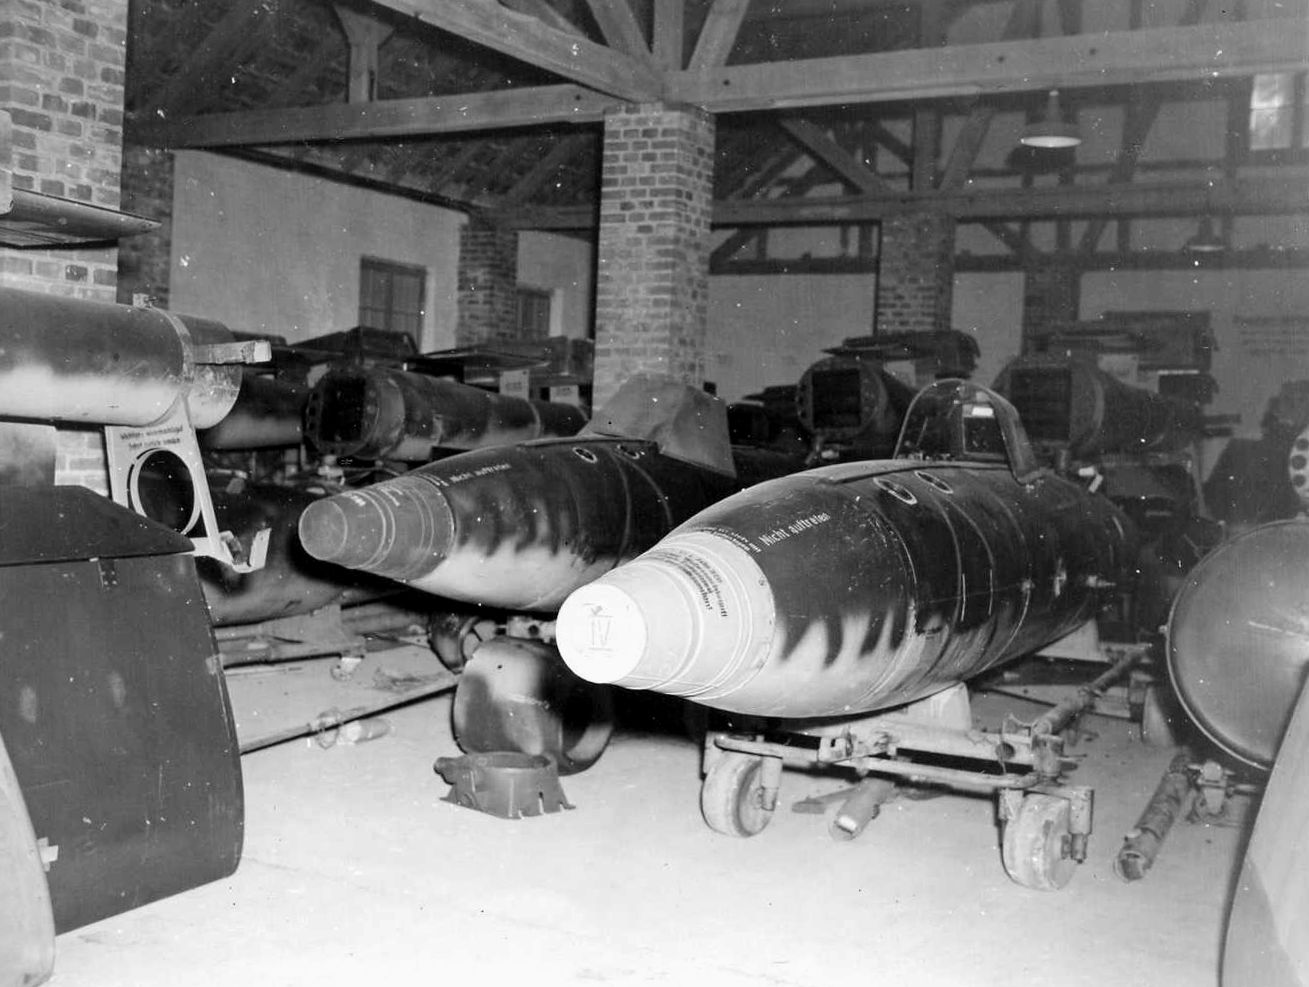 Bombs awaiting shipment to launching sites were found in sheds at the V-bomb assembly plant.